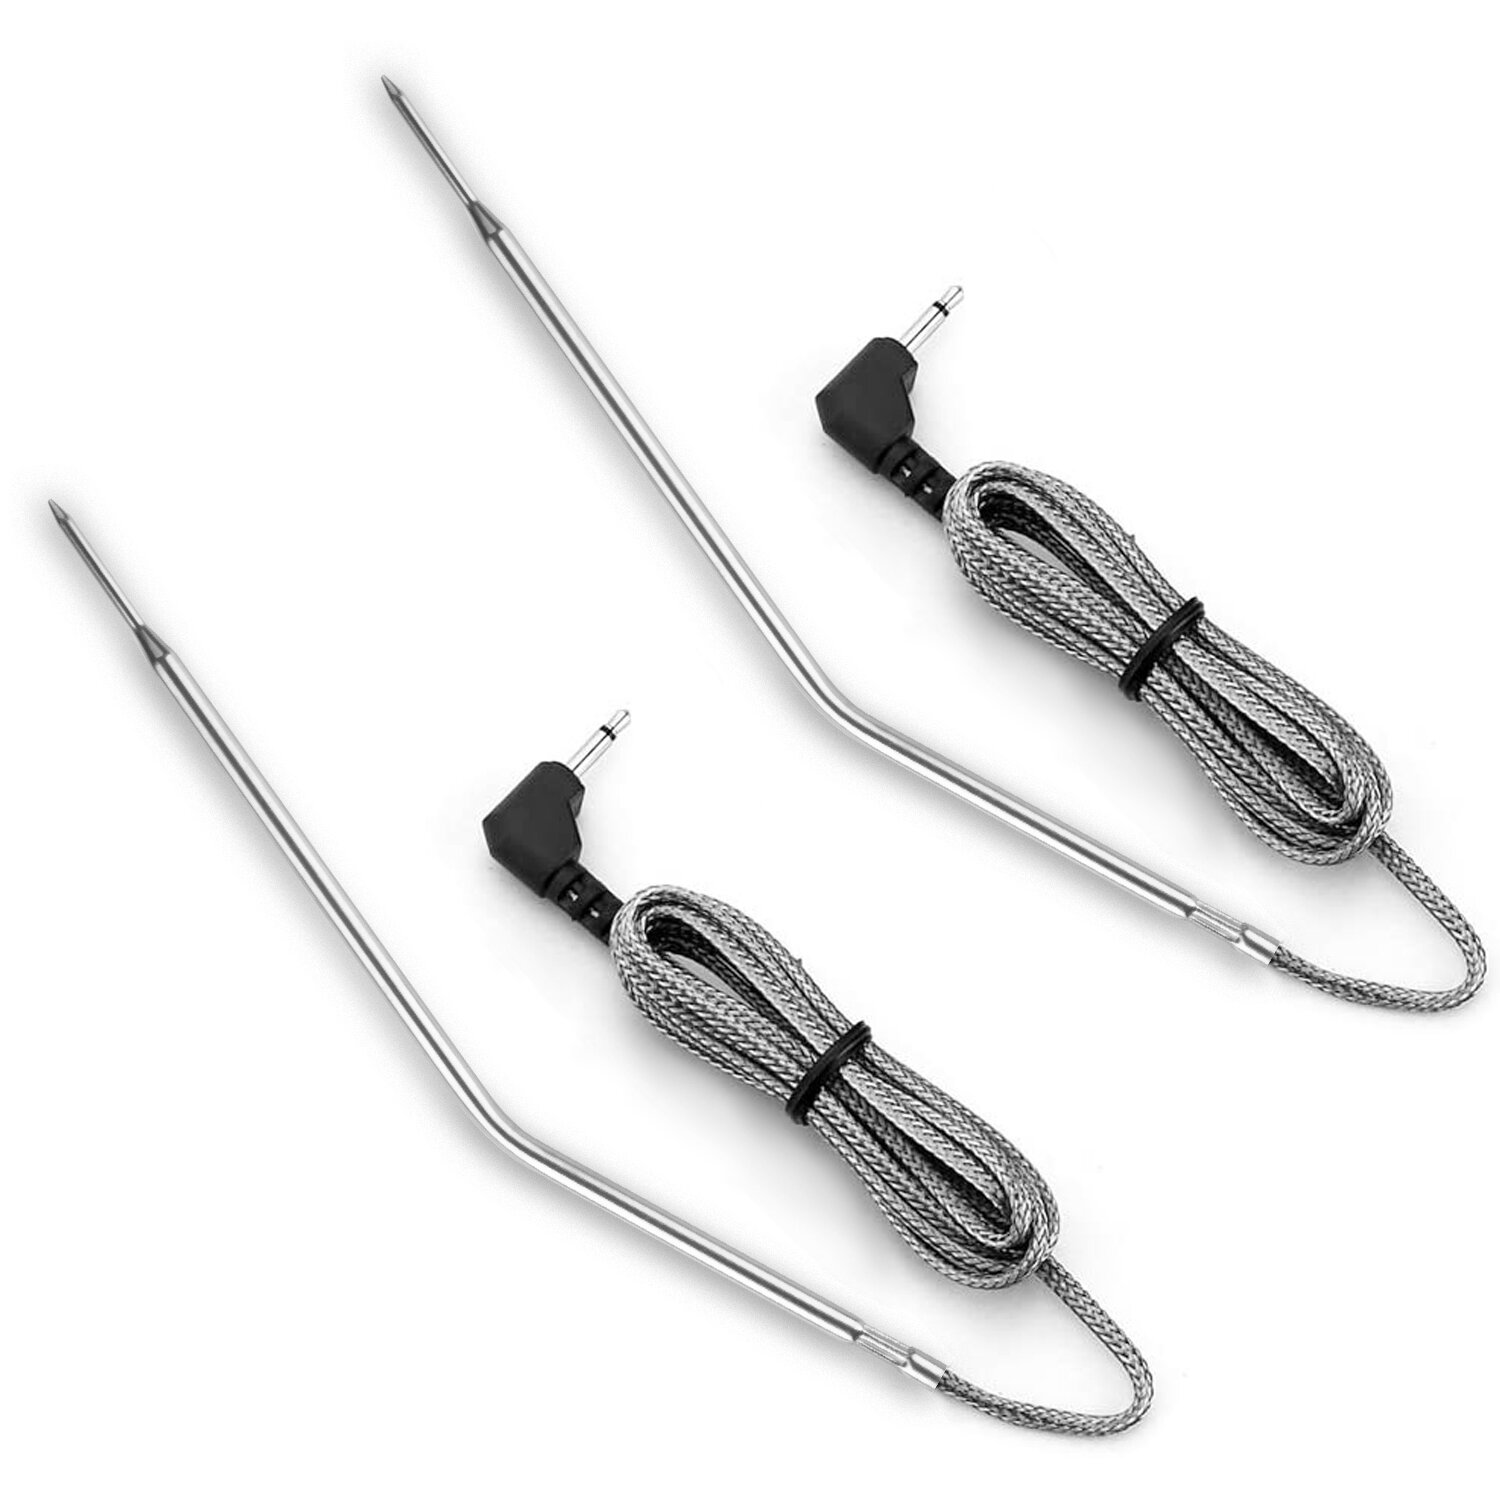 KULUNER Meat Thermometer Probe Replacement